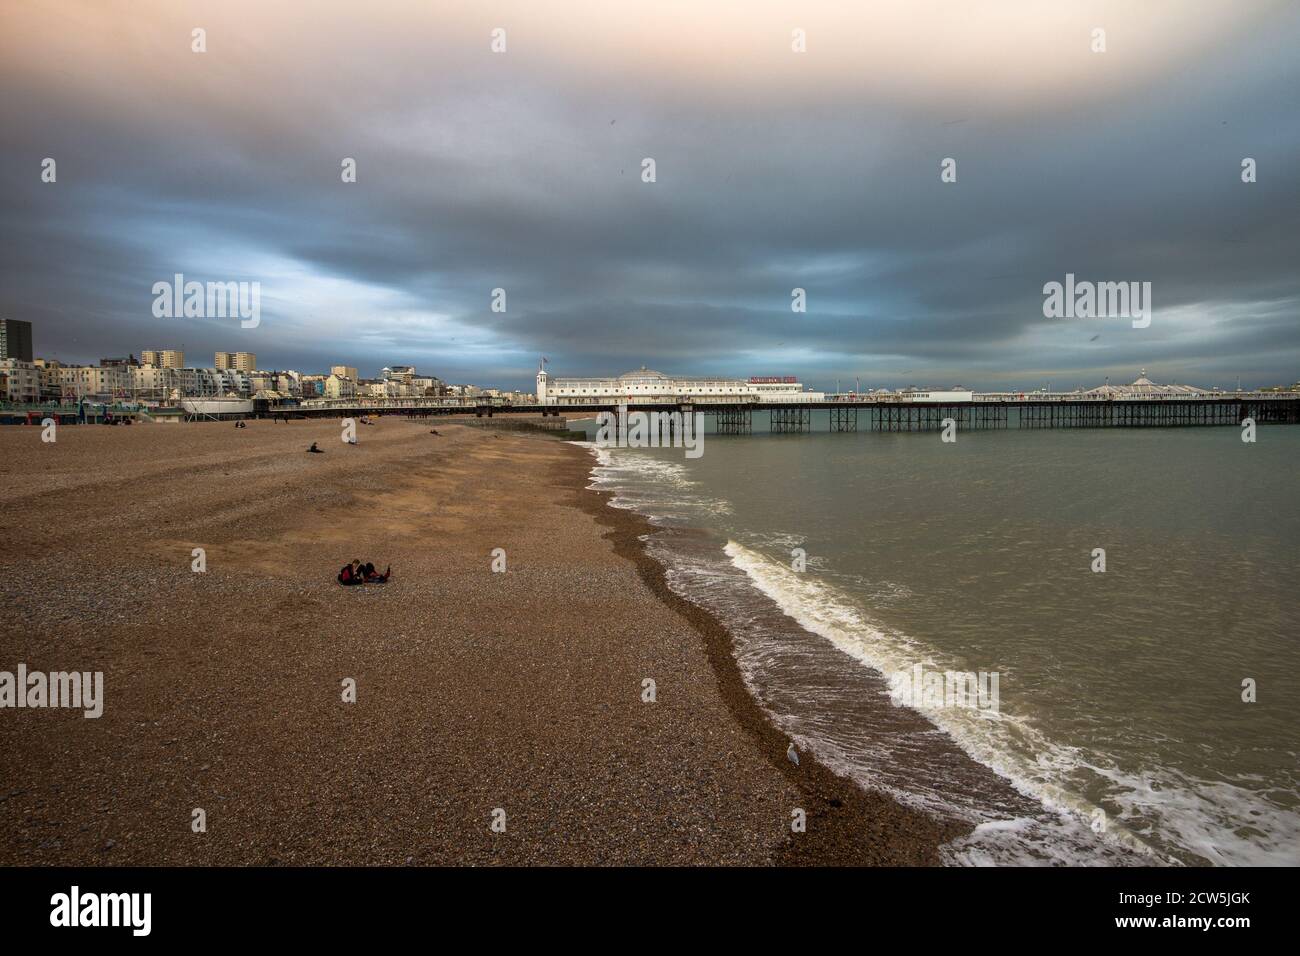 Brighton, East Sussex, England, UK. 27 Sunset on Brighton beach looking towards the pier, deserted beach despite many students heading to town for the start of freshers week September 2020 ©Sarah Mott / Alamy Live News Stock Photo